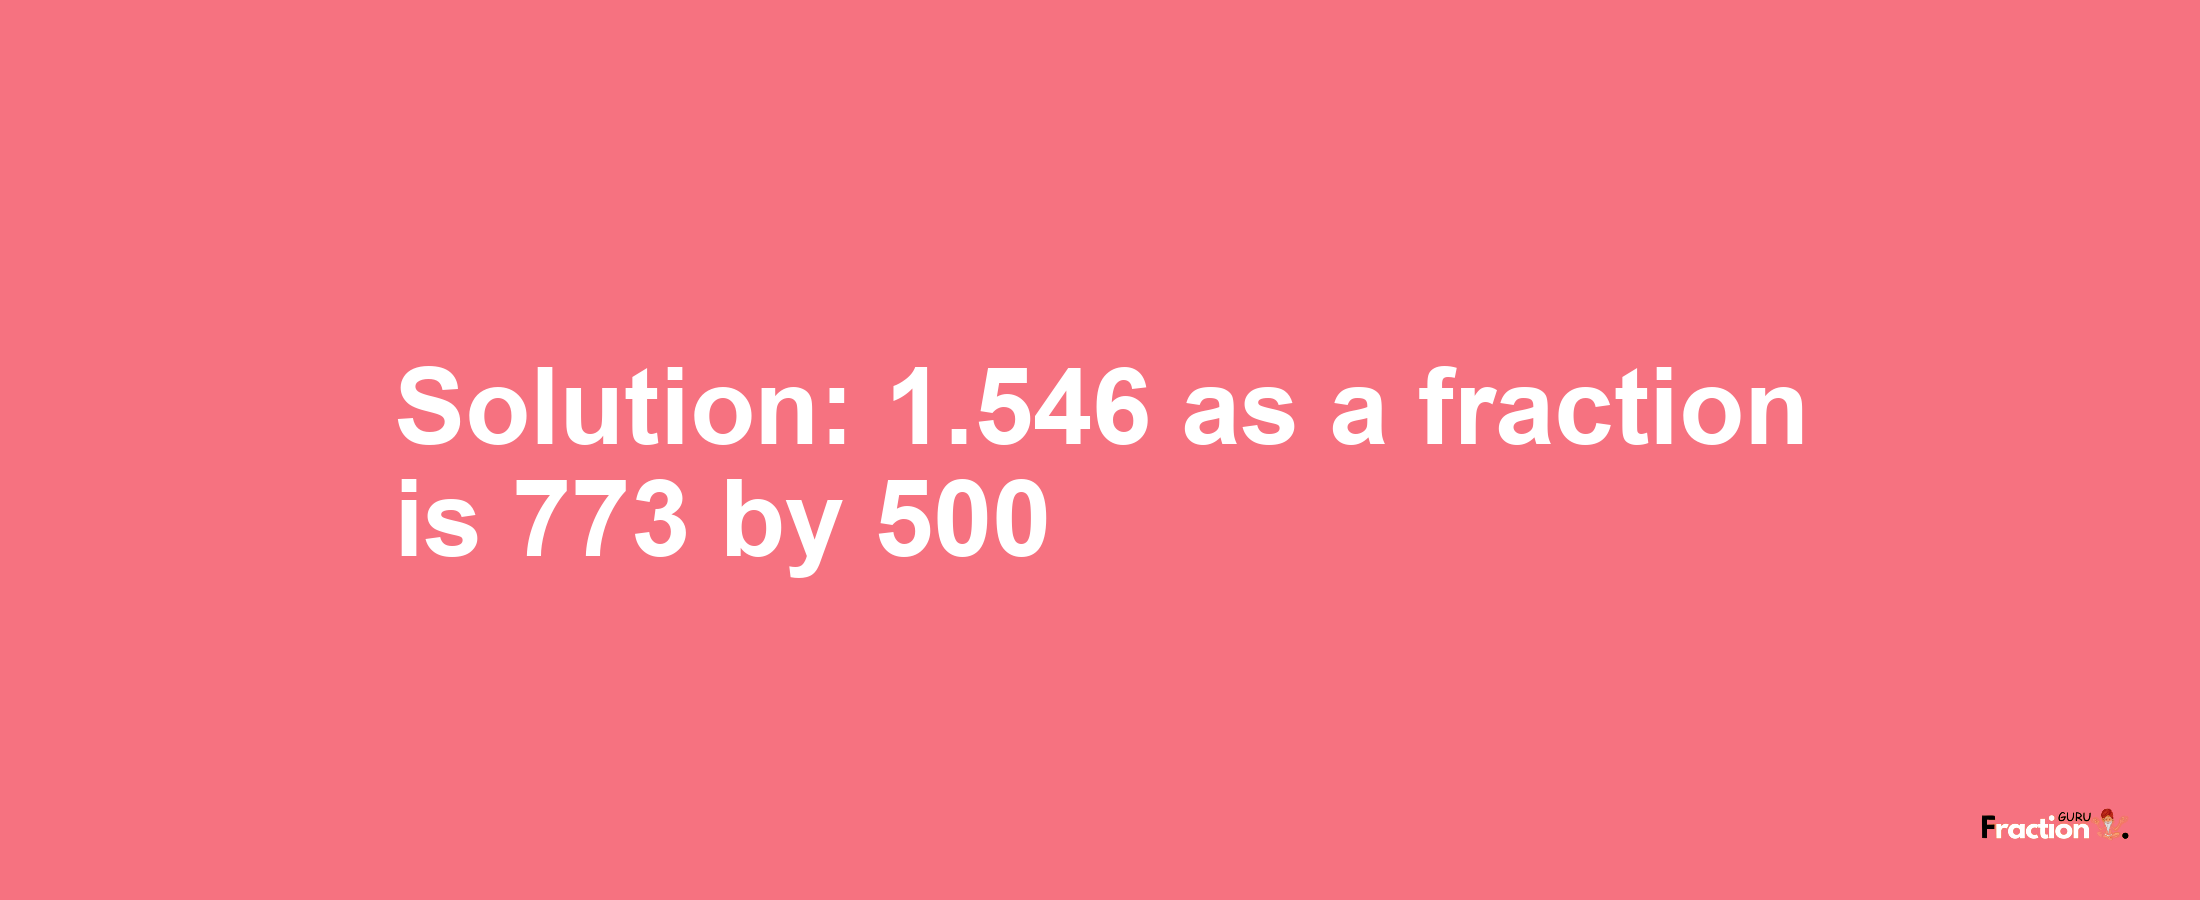 Solution:1.546 as a fraction is 773/500